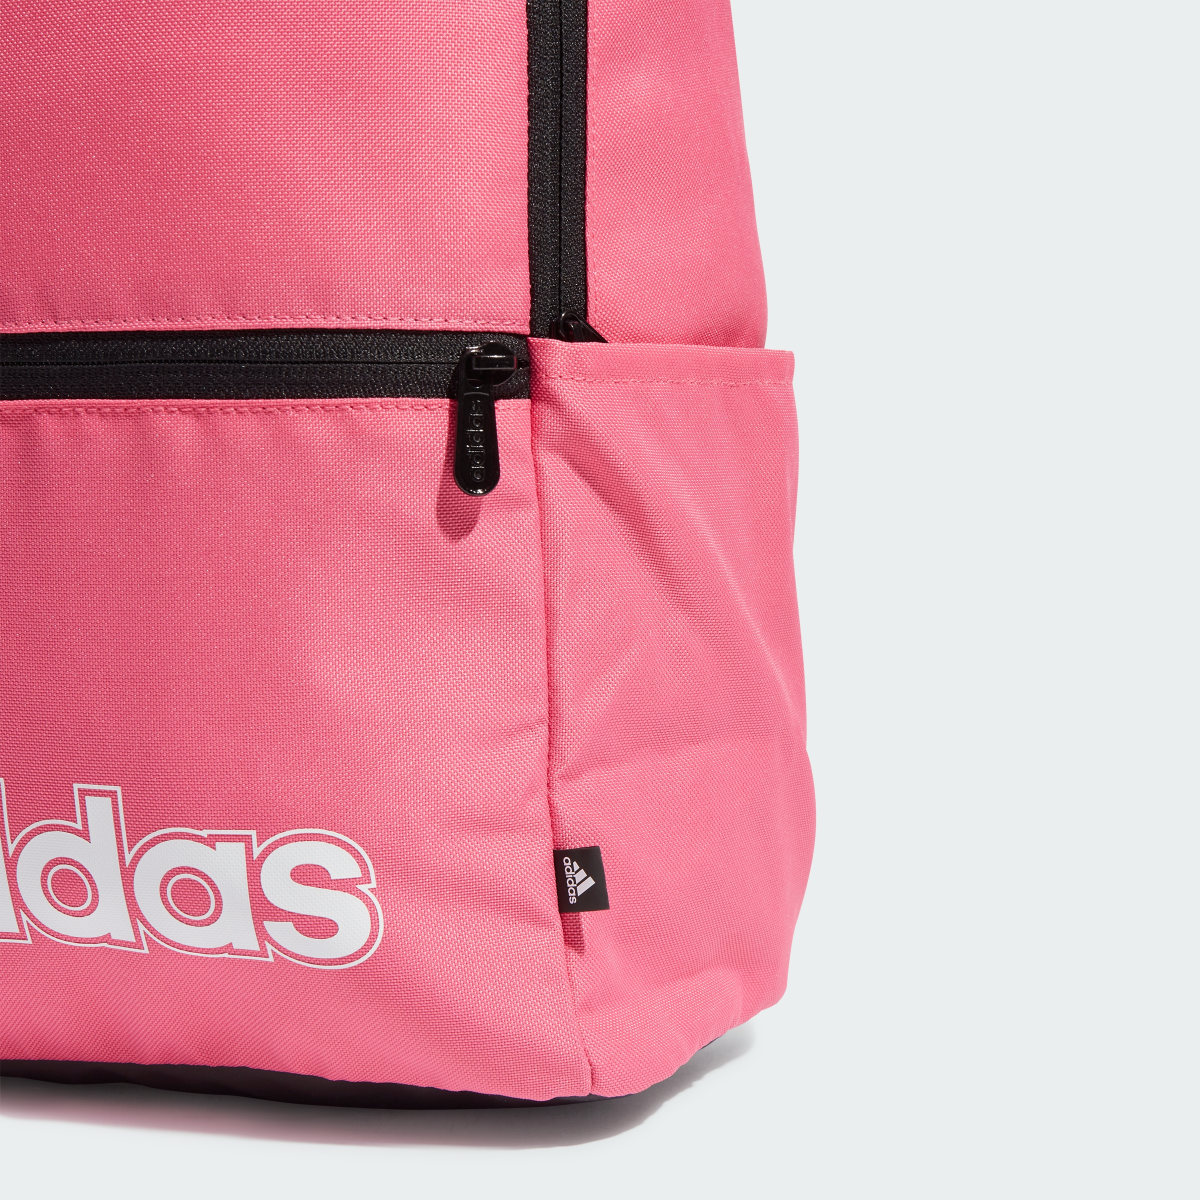 Adidas Classic Foundation Backpack. 4